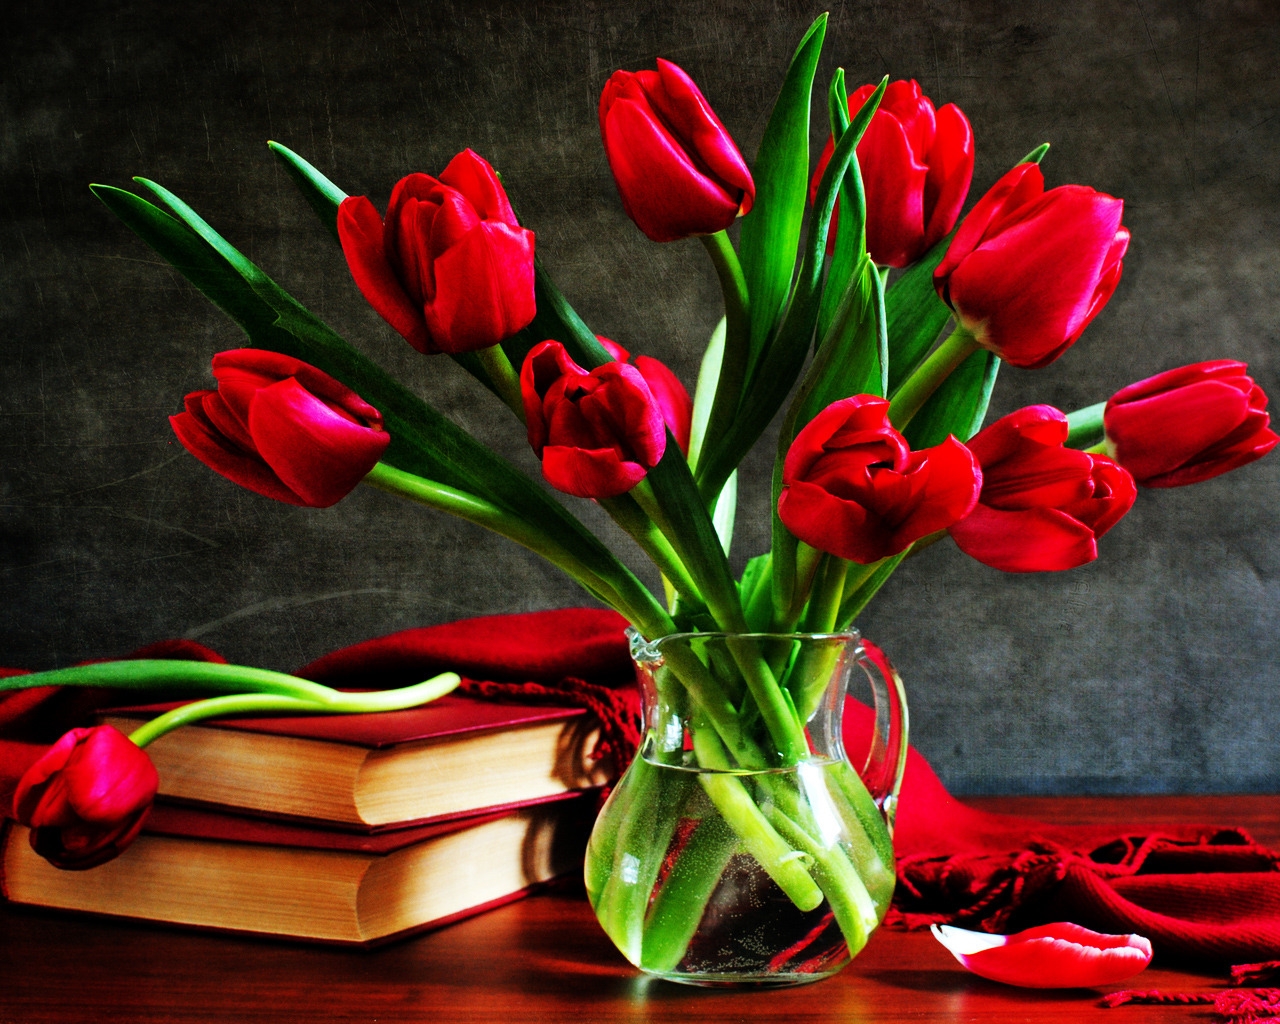 Tulips Vase for 1280 x 1024 resolution